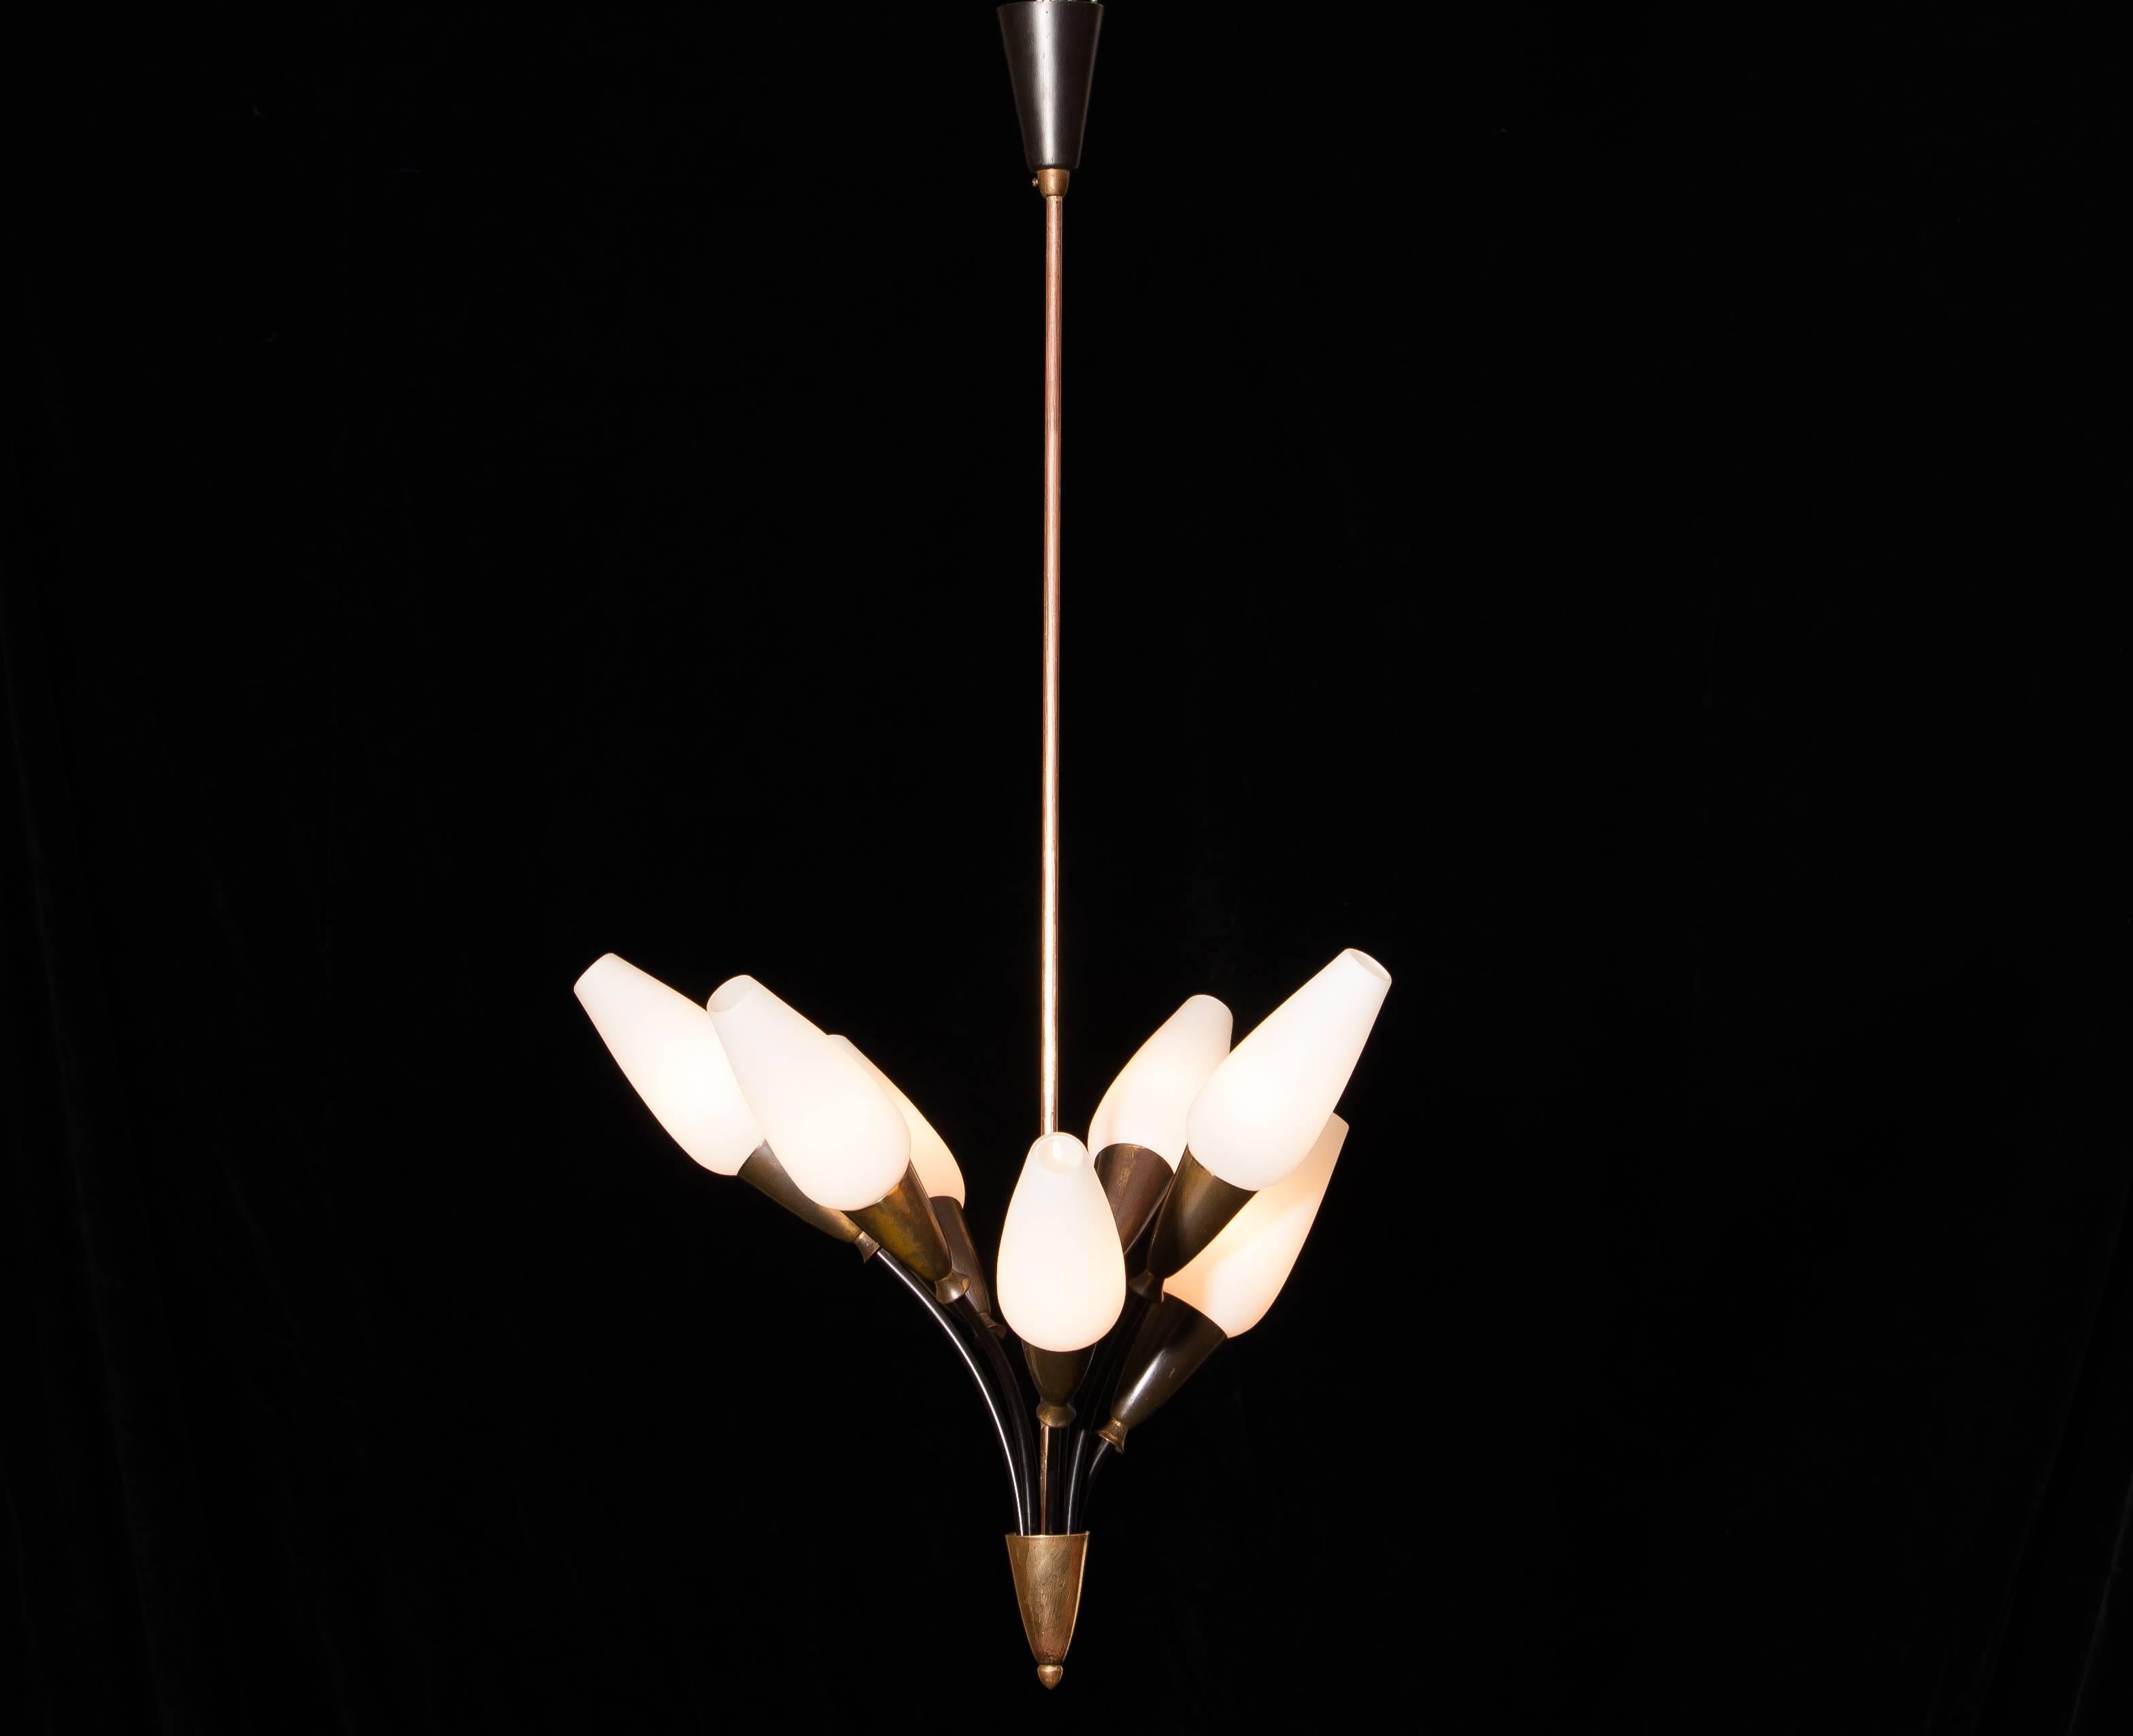 Beautiful tulip pendant made in Italy.
This chandelier is made of brass and has seven arms with white glass shades.
It is in a very nice condition.
Period 1950
Dimensions: H 100 cm, ø 60 cm.